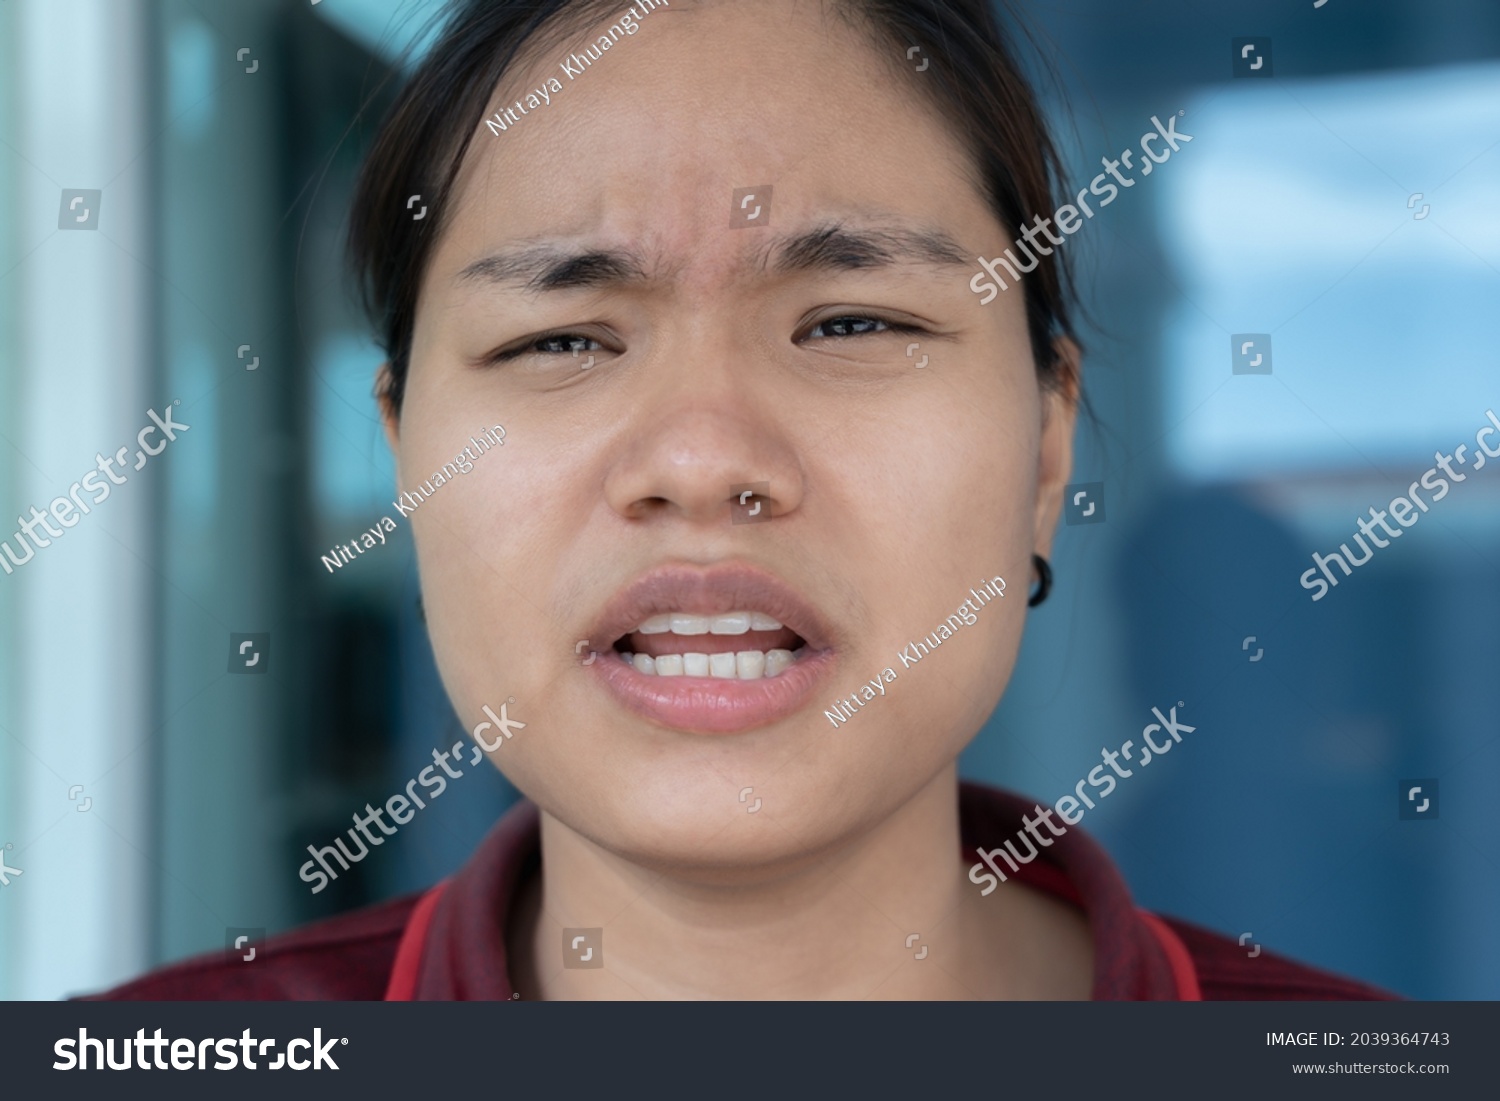 Confused young girl expressing distrust and suspicion, doubt and confusion concept. Woman with disgruntled face, complaining and arguing, talking troubled uneasy, stare camera angry. Human emotion #2039364743